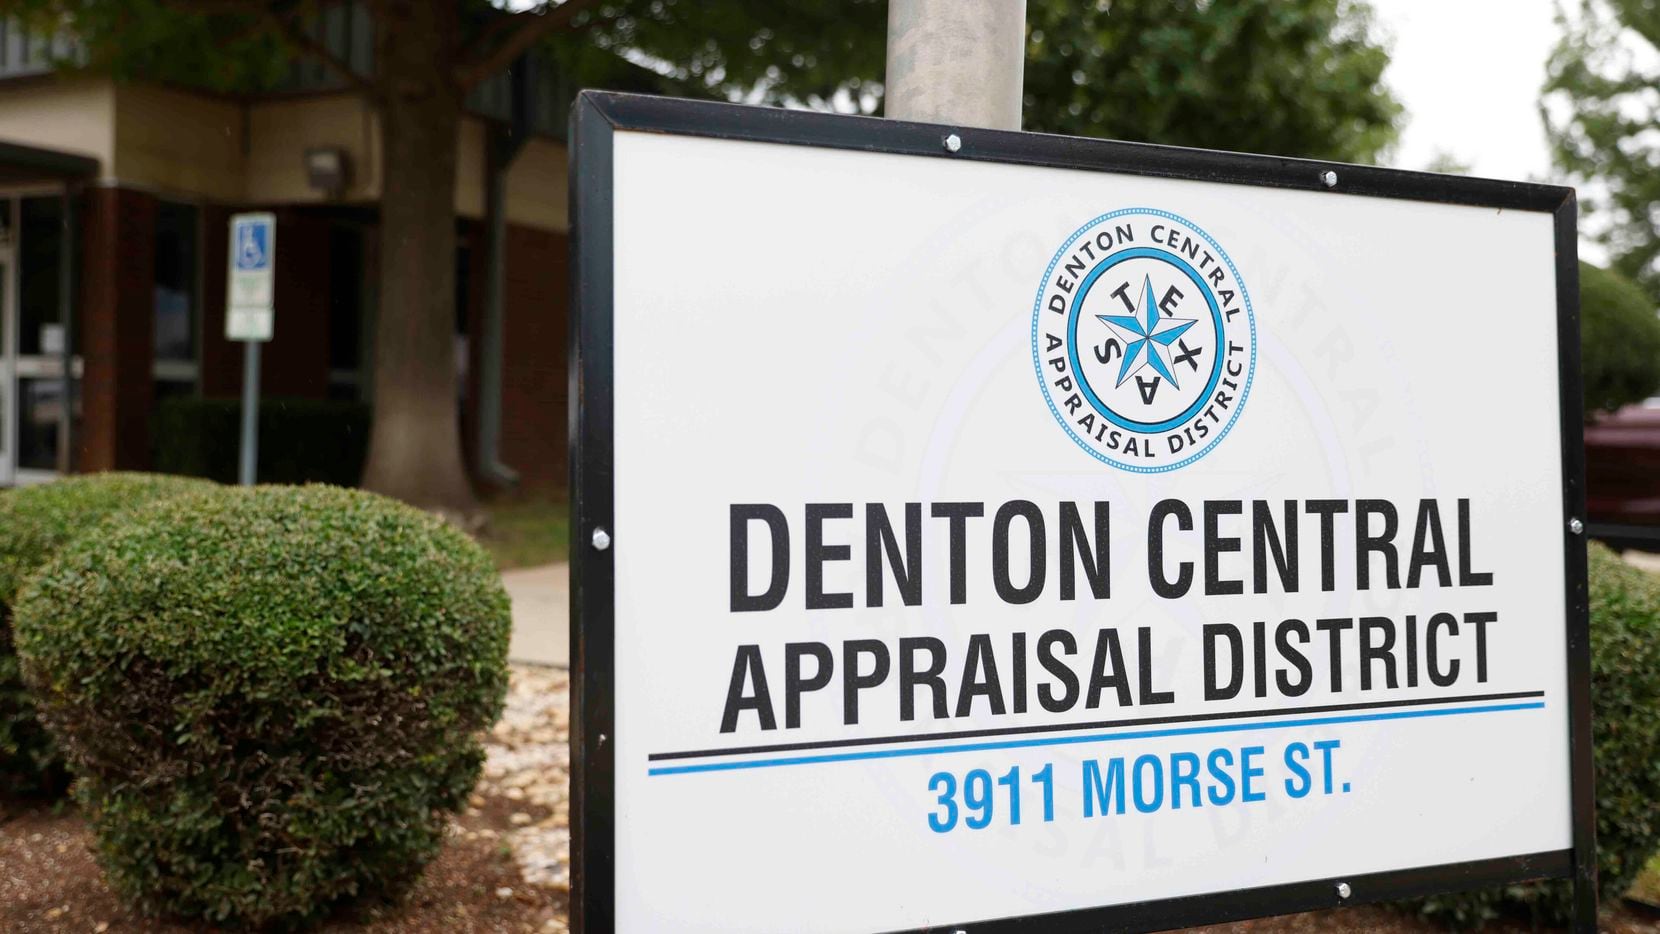 More hijinks as Denton appraisal district asks homeowners how much their homes are worth